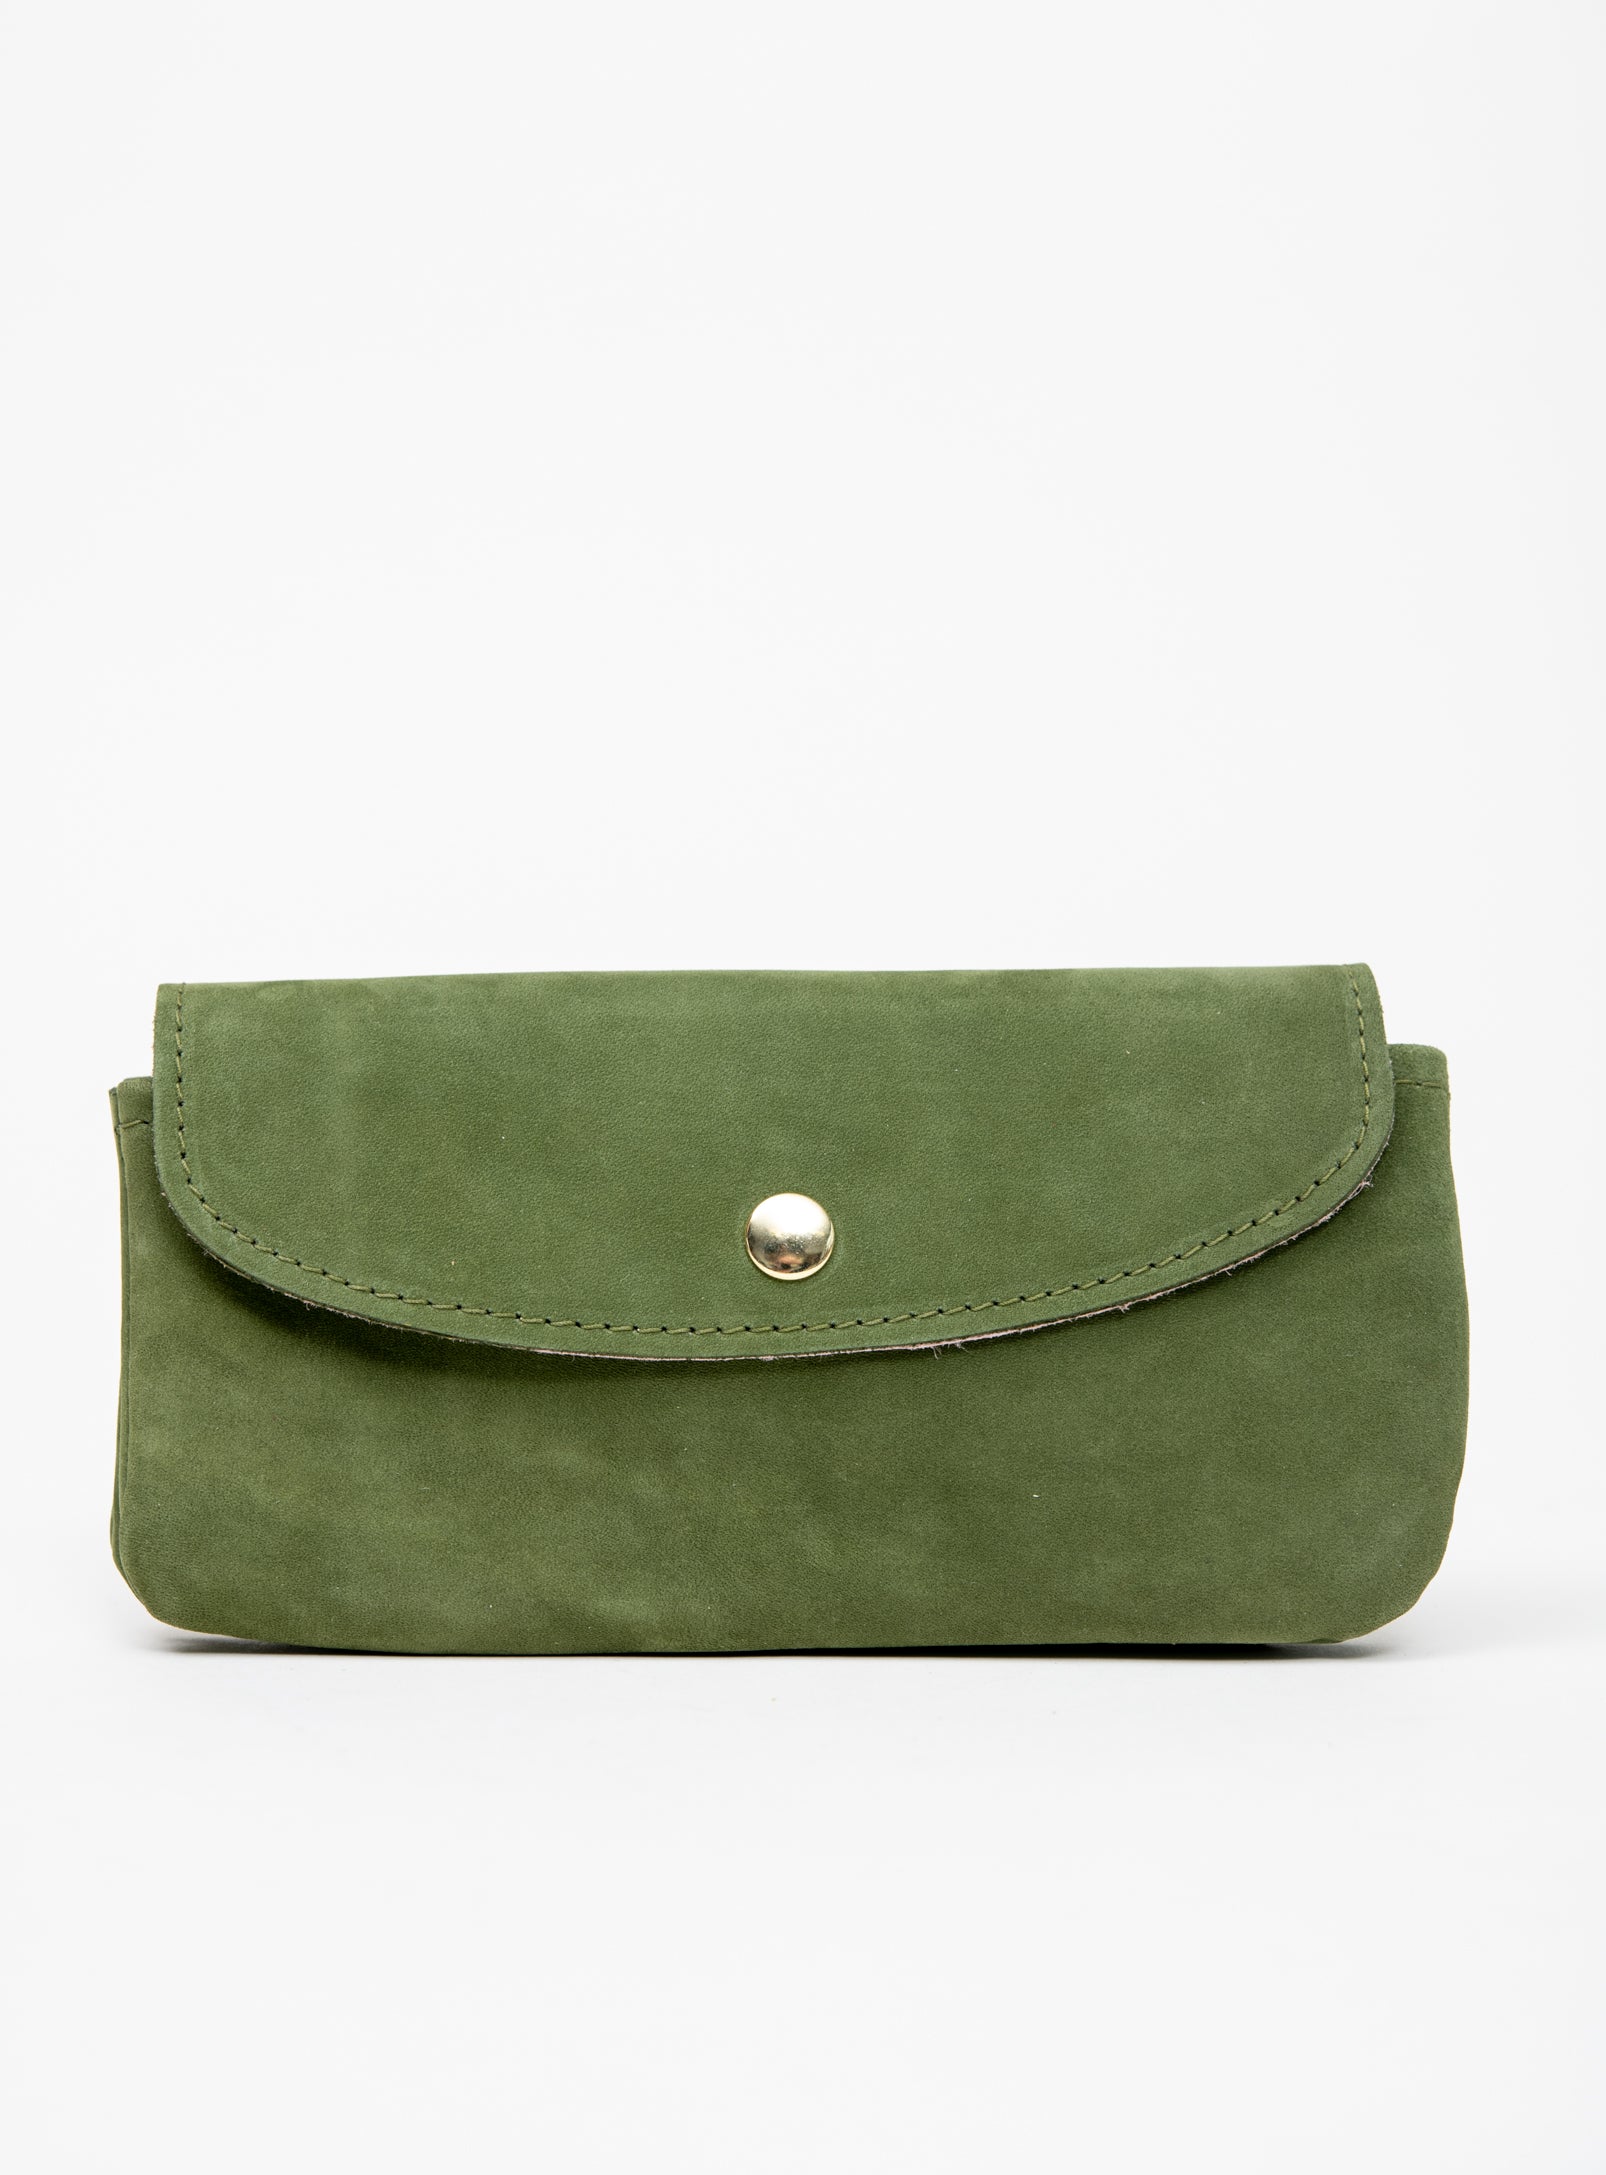 Veinage Minimalist green suede leather wallet MARQUETTE model